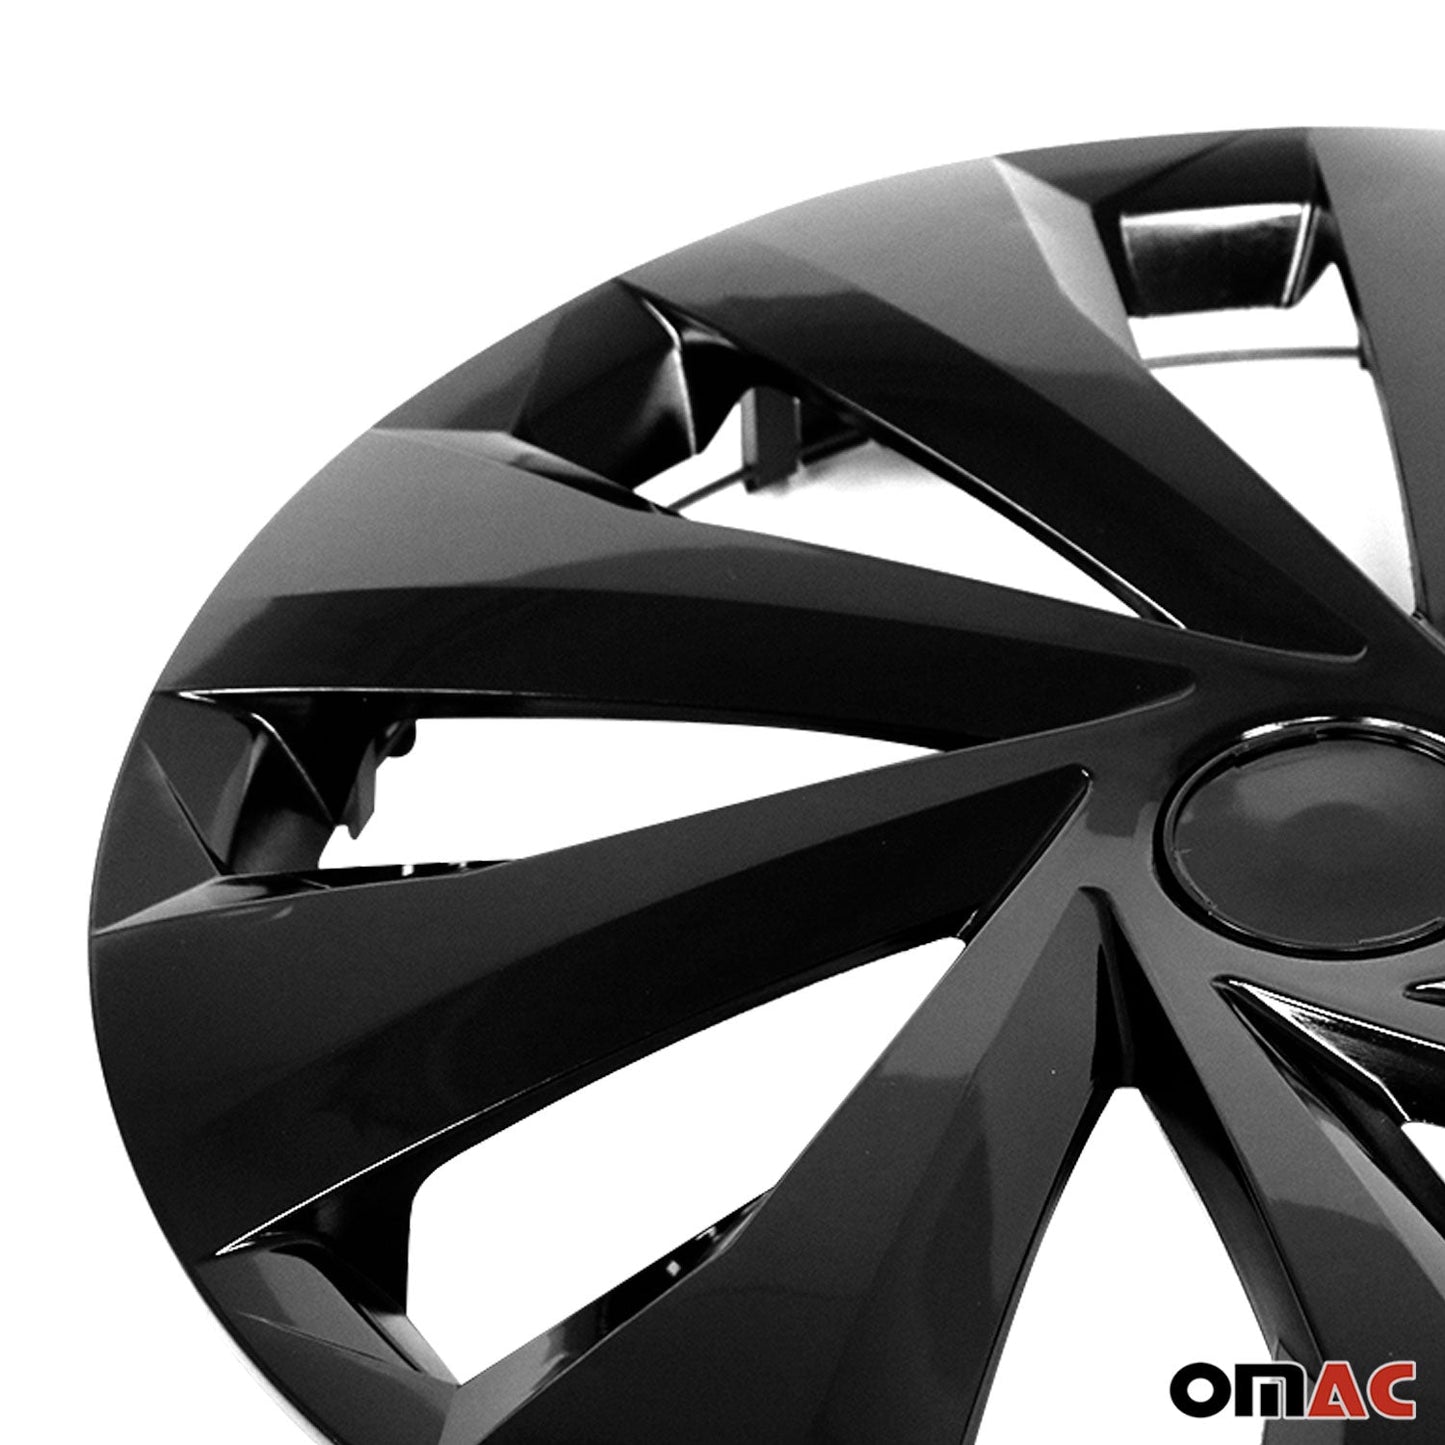 OMAC 15 Inch Wheel Rim Covers Hubcaps for Smart Black Gloss A017781